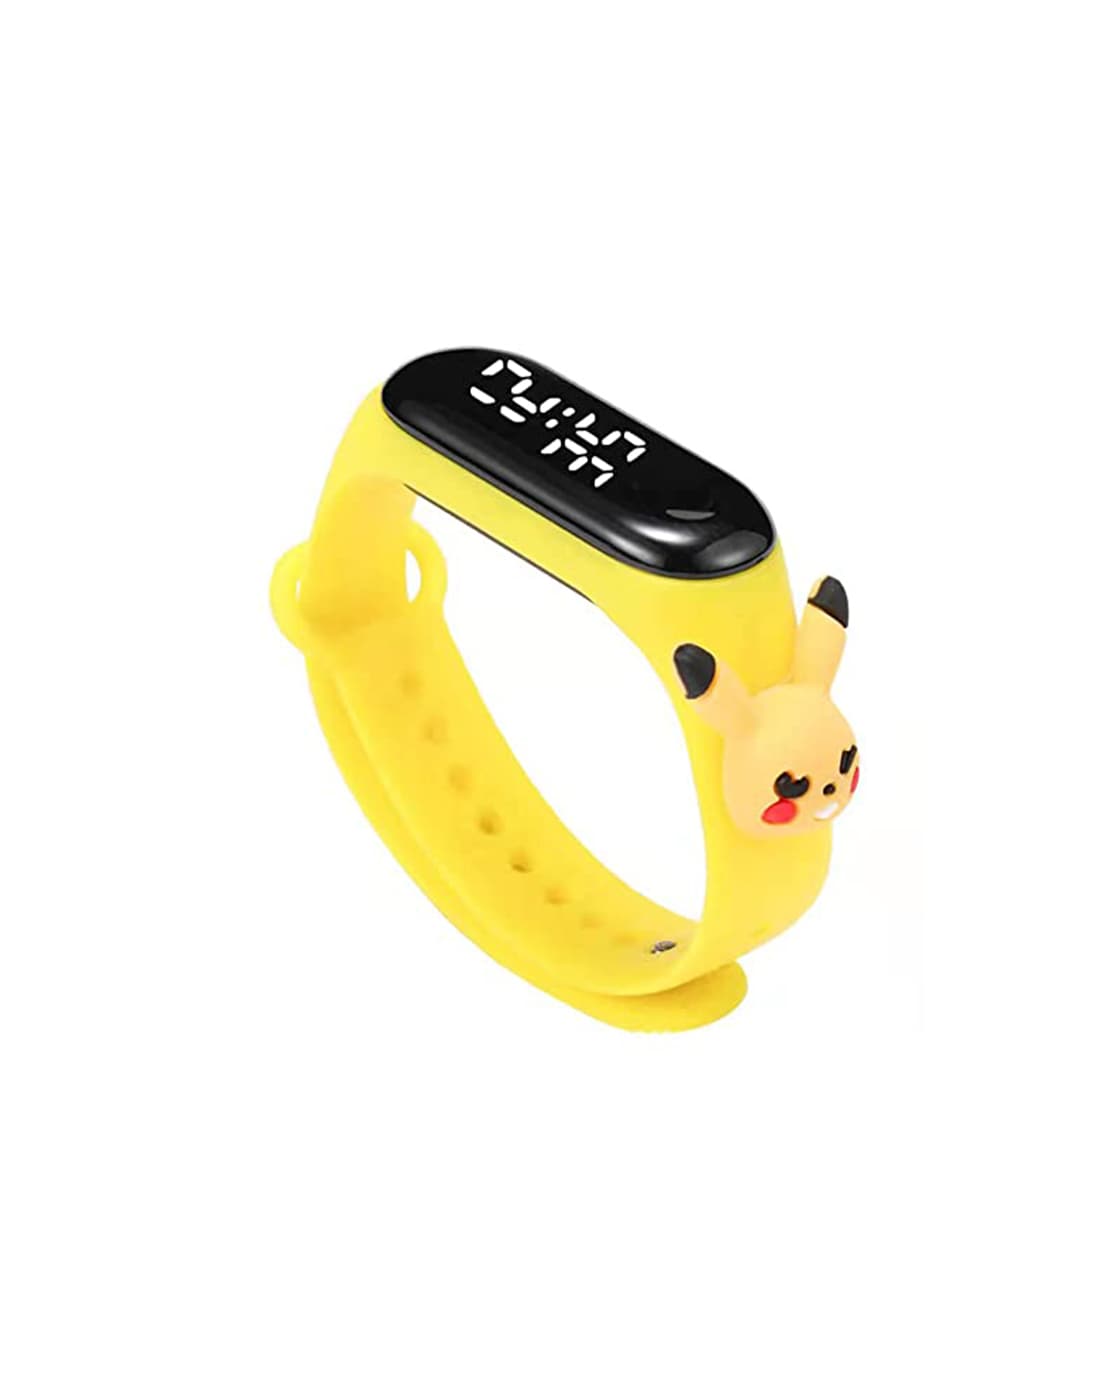 Pikachu, I Choose You. Casual day with the Apple Watch. : r/AppleWatch